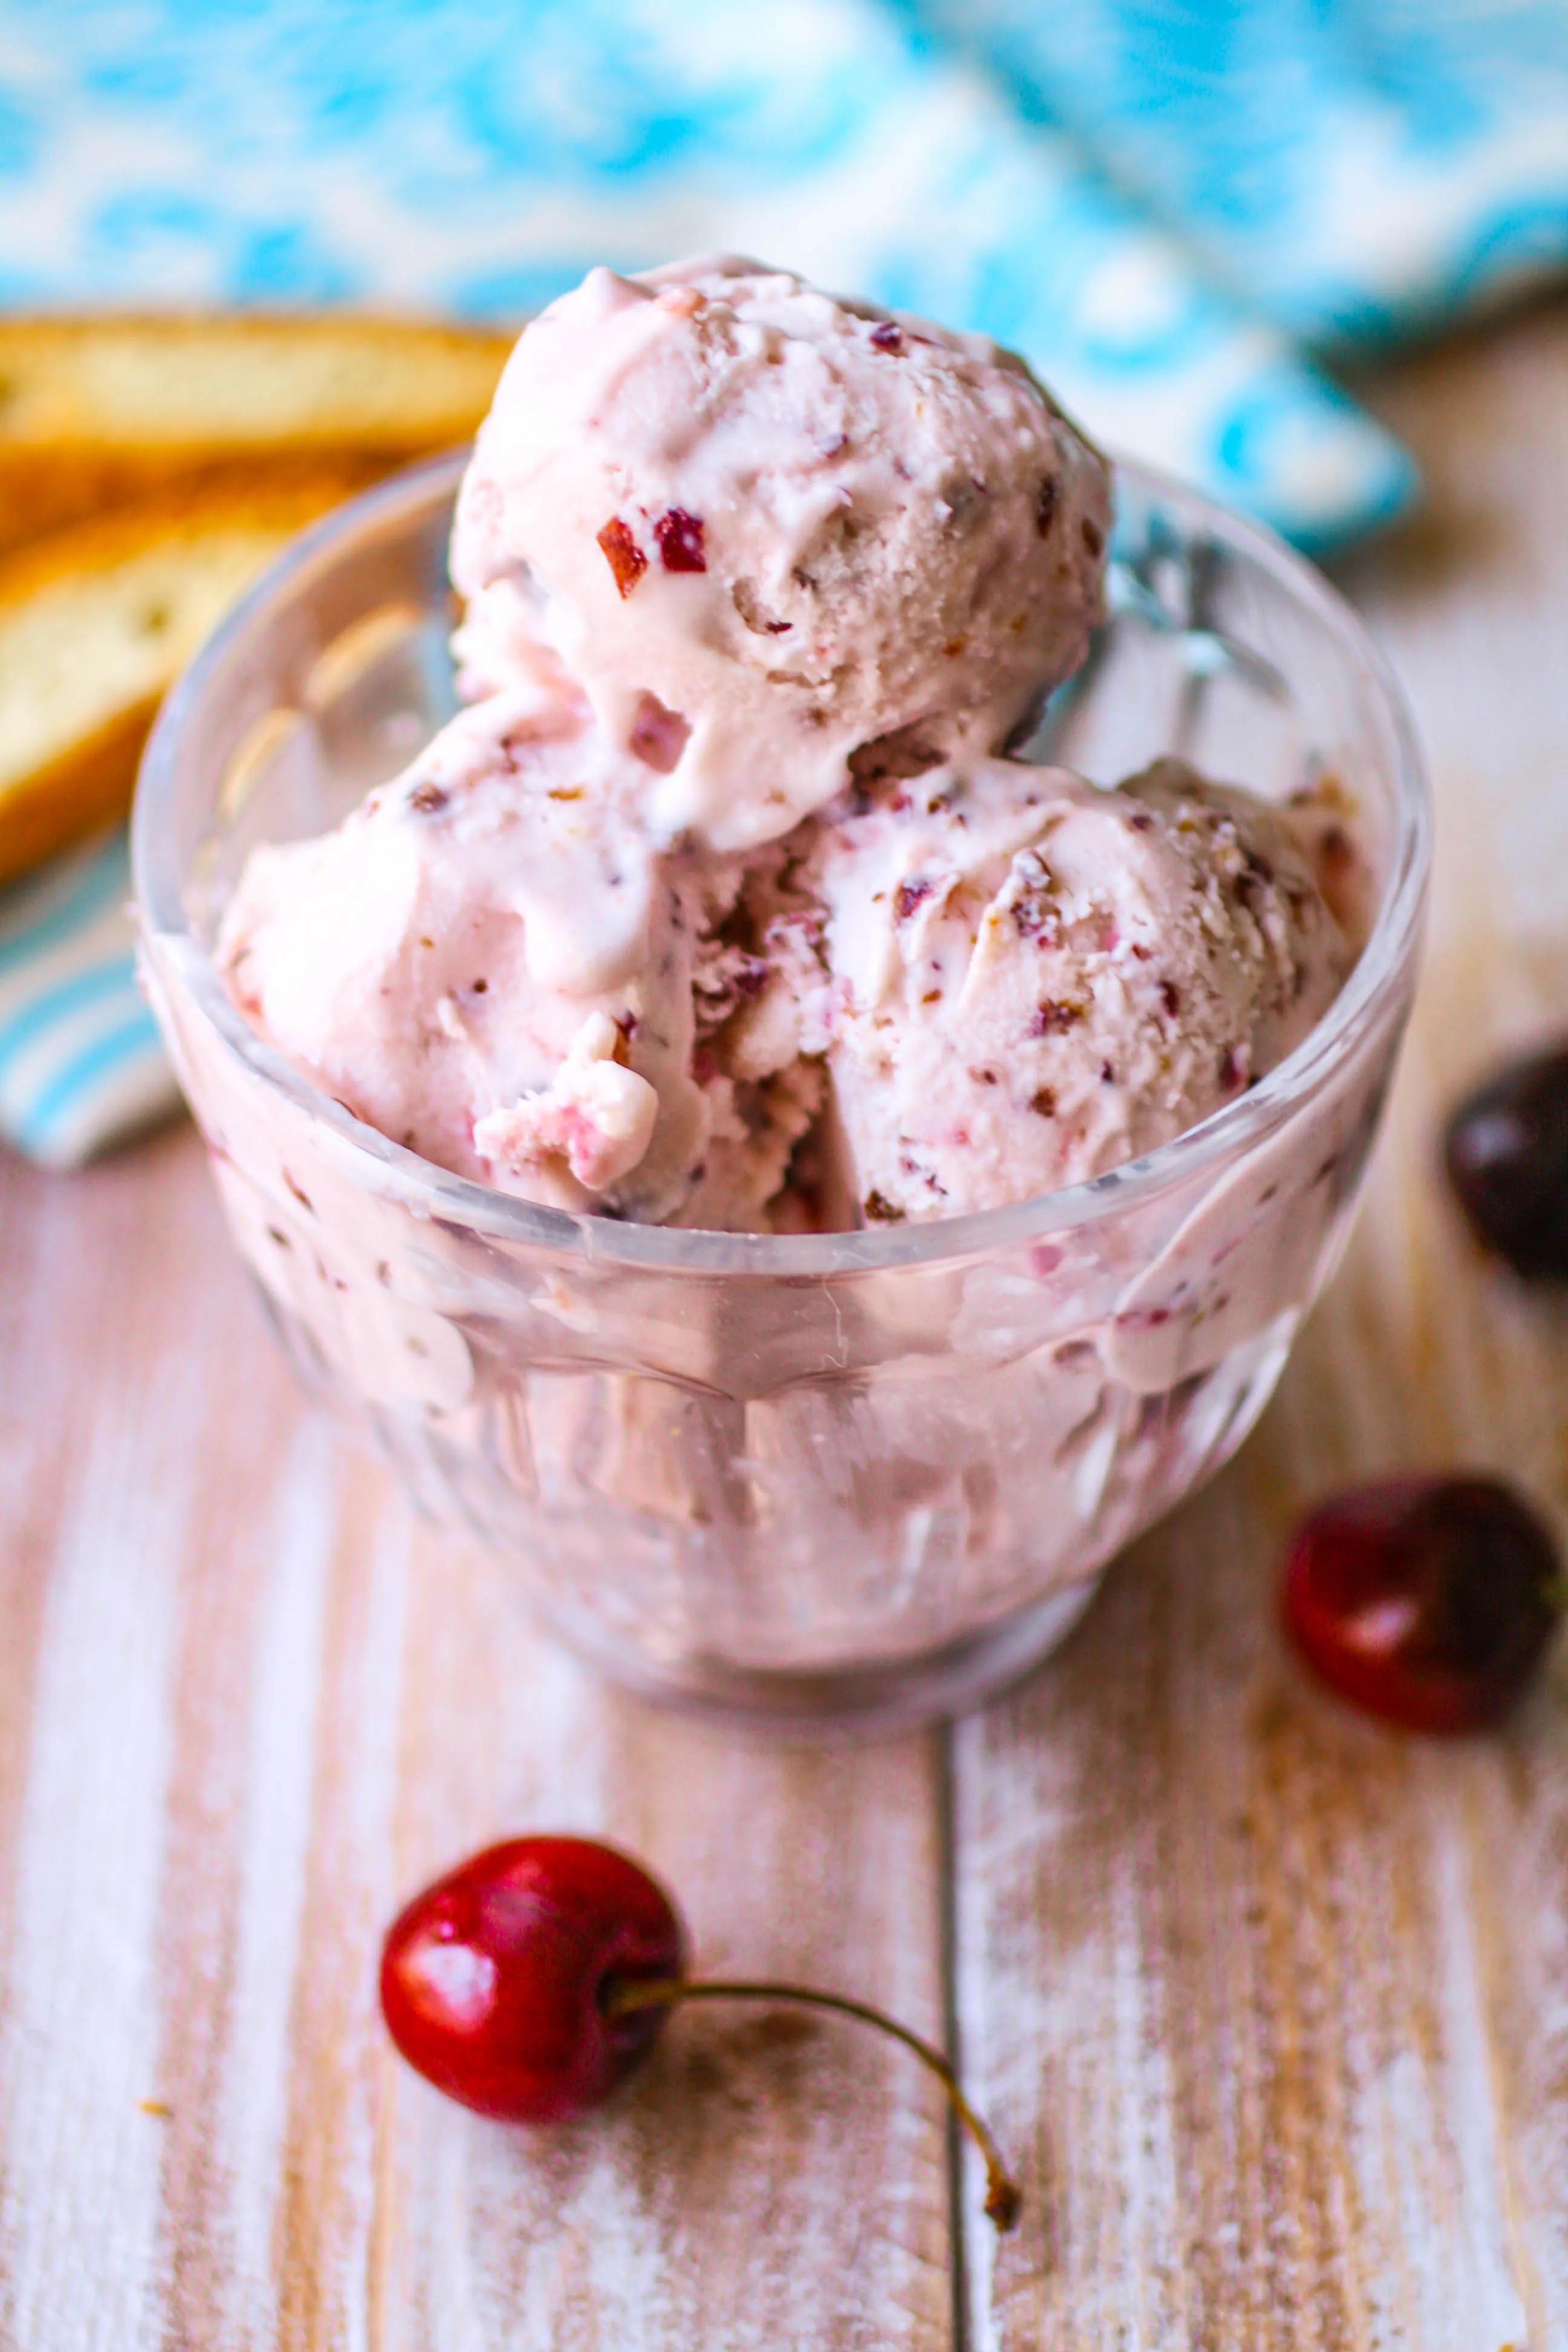 Cherry-Almond Ricotta Ice Cream is a fabulous dessert for the season. Cherry-Almond Ricotta Ice Cream is a lovely dessert.